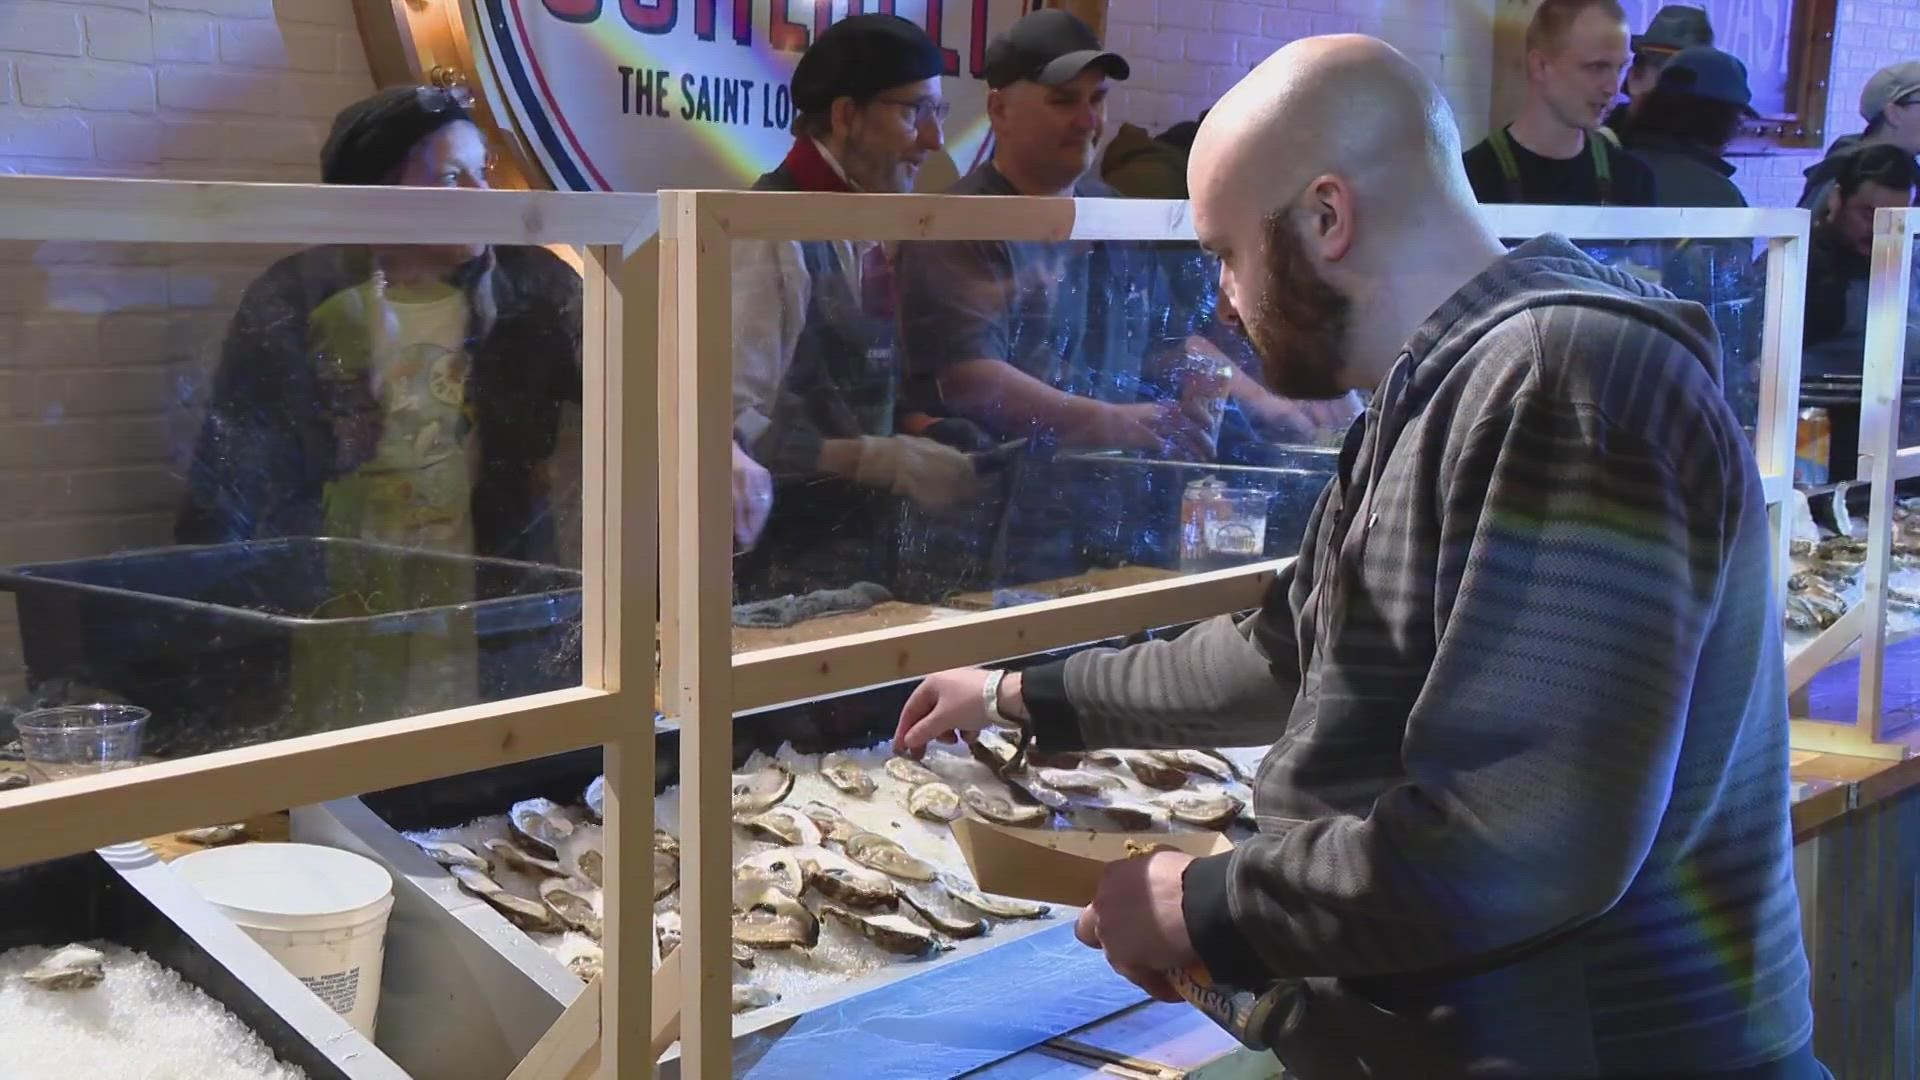 It's billed as the largest oyster festival in the Midwest. Twenty "star shuckers" will shuck 80,000 fresh oysters flown in overnight from both coasts.